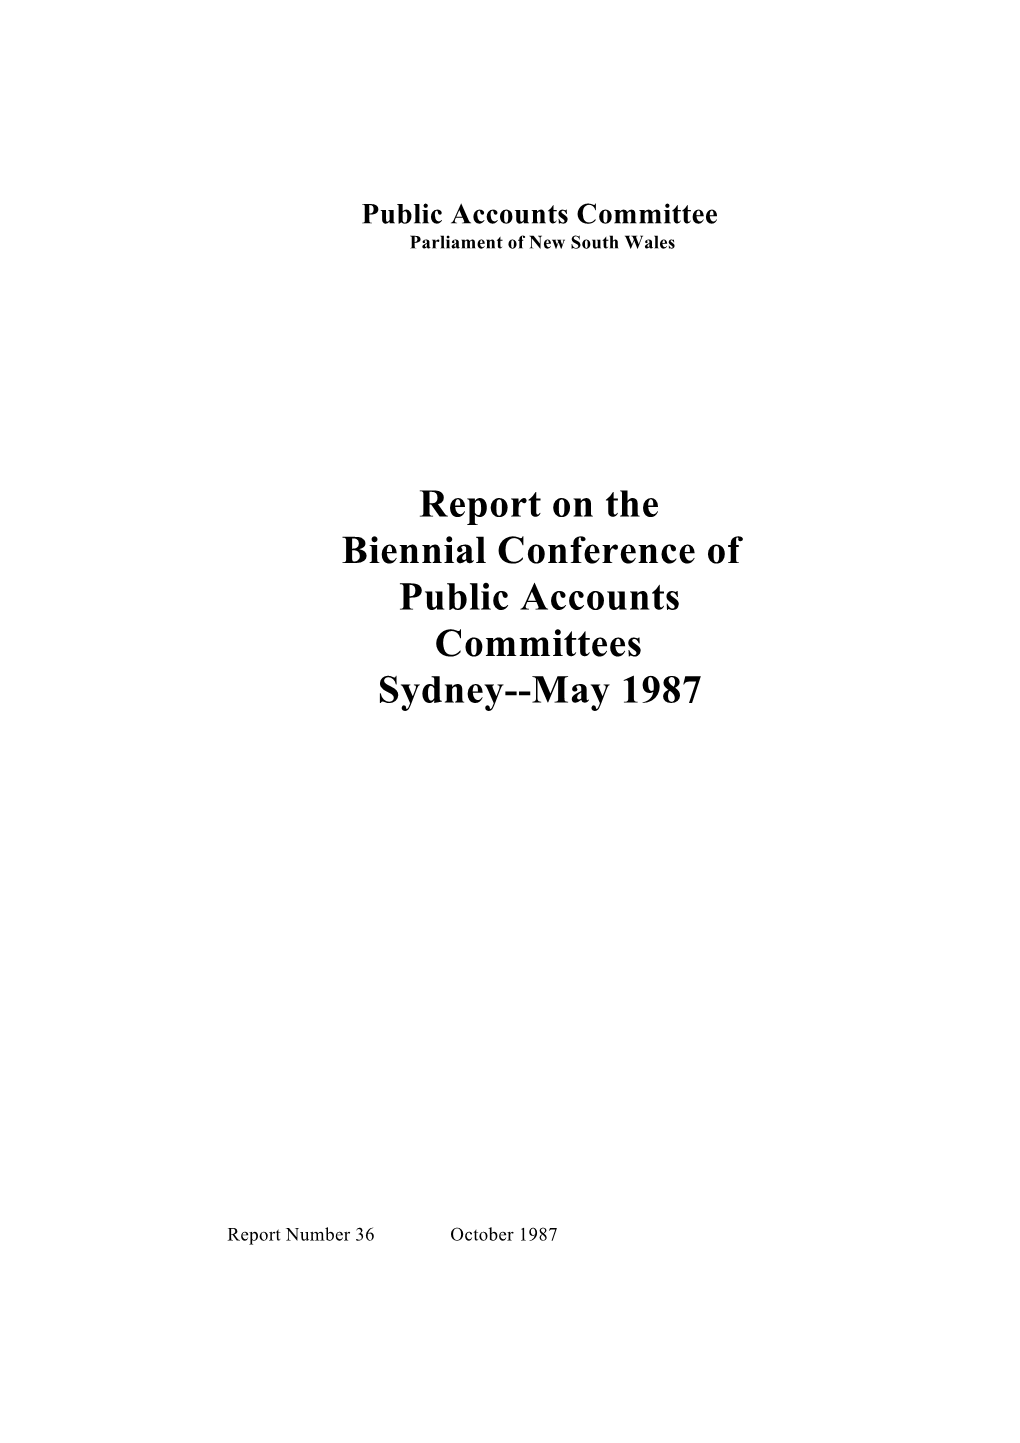 Biennial Conference of Public Accounts Committees Sydney--May 1987